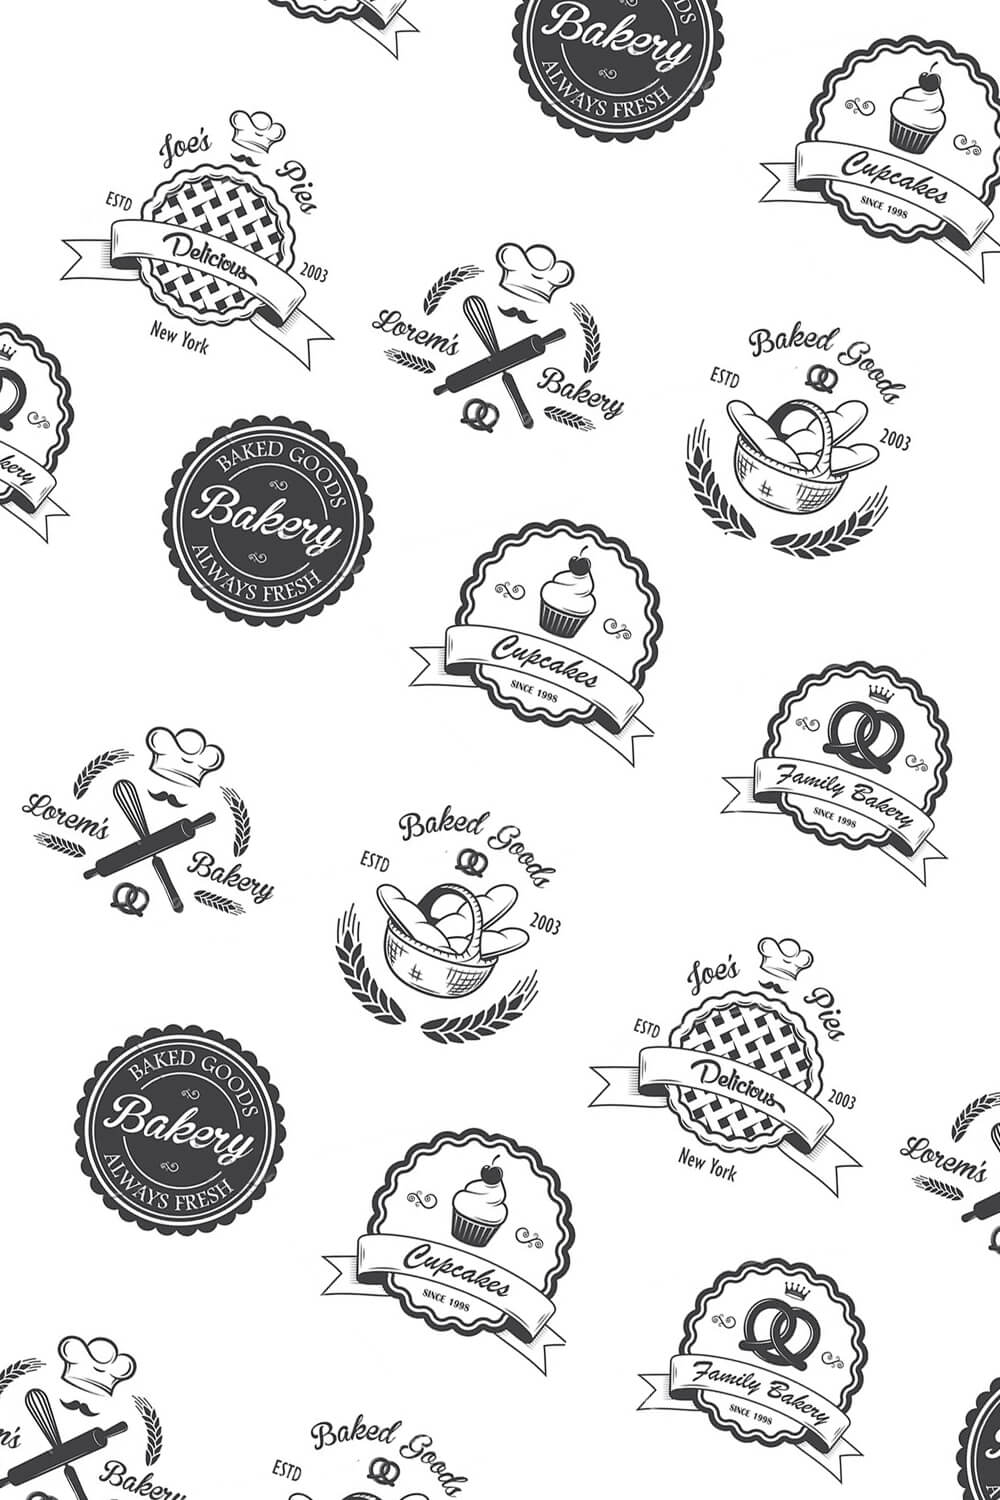 Many black logos of vintage bakery emblems on a white background at an angle.